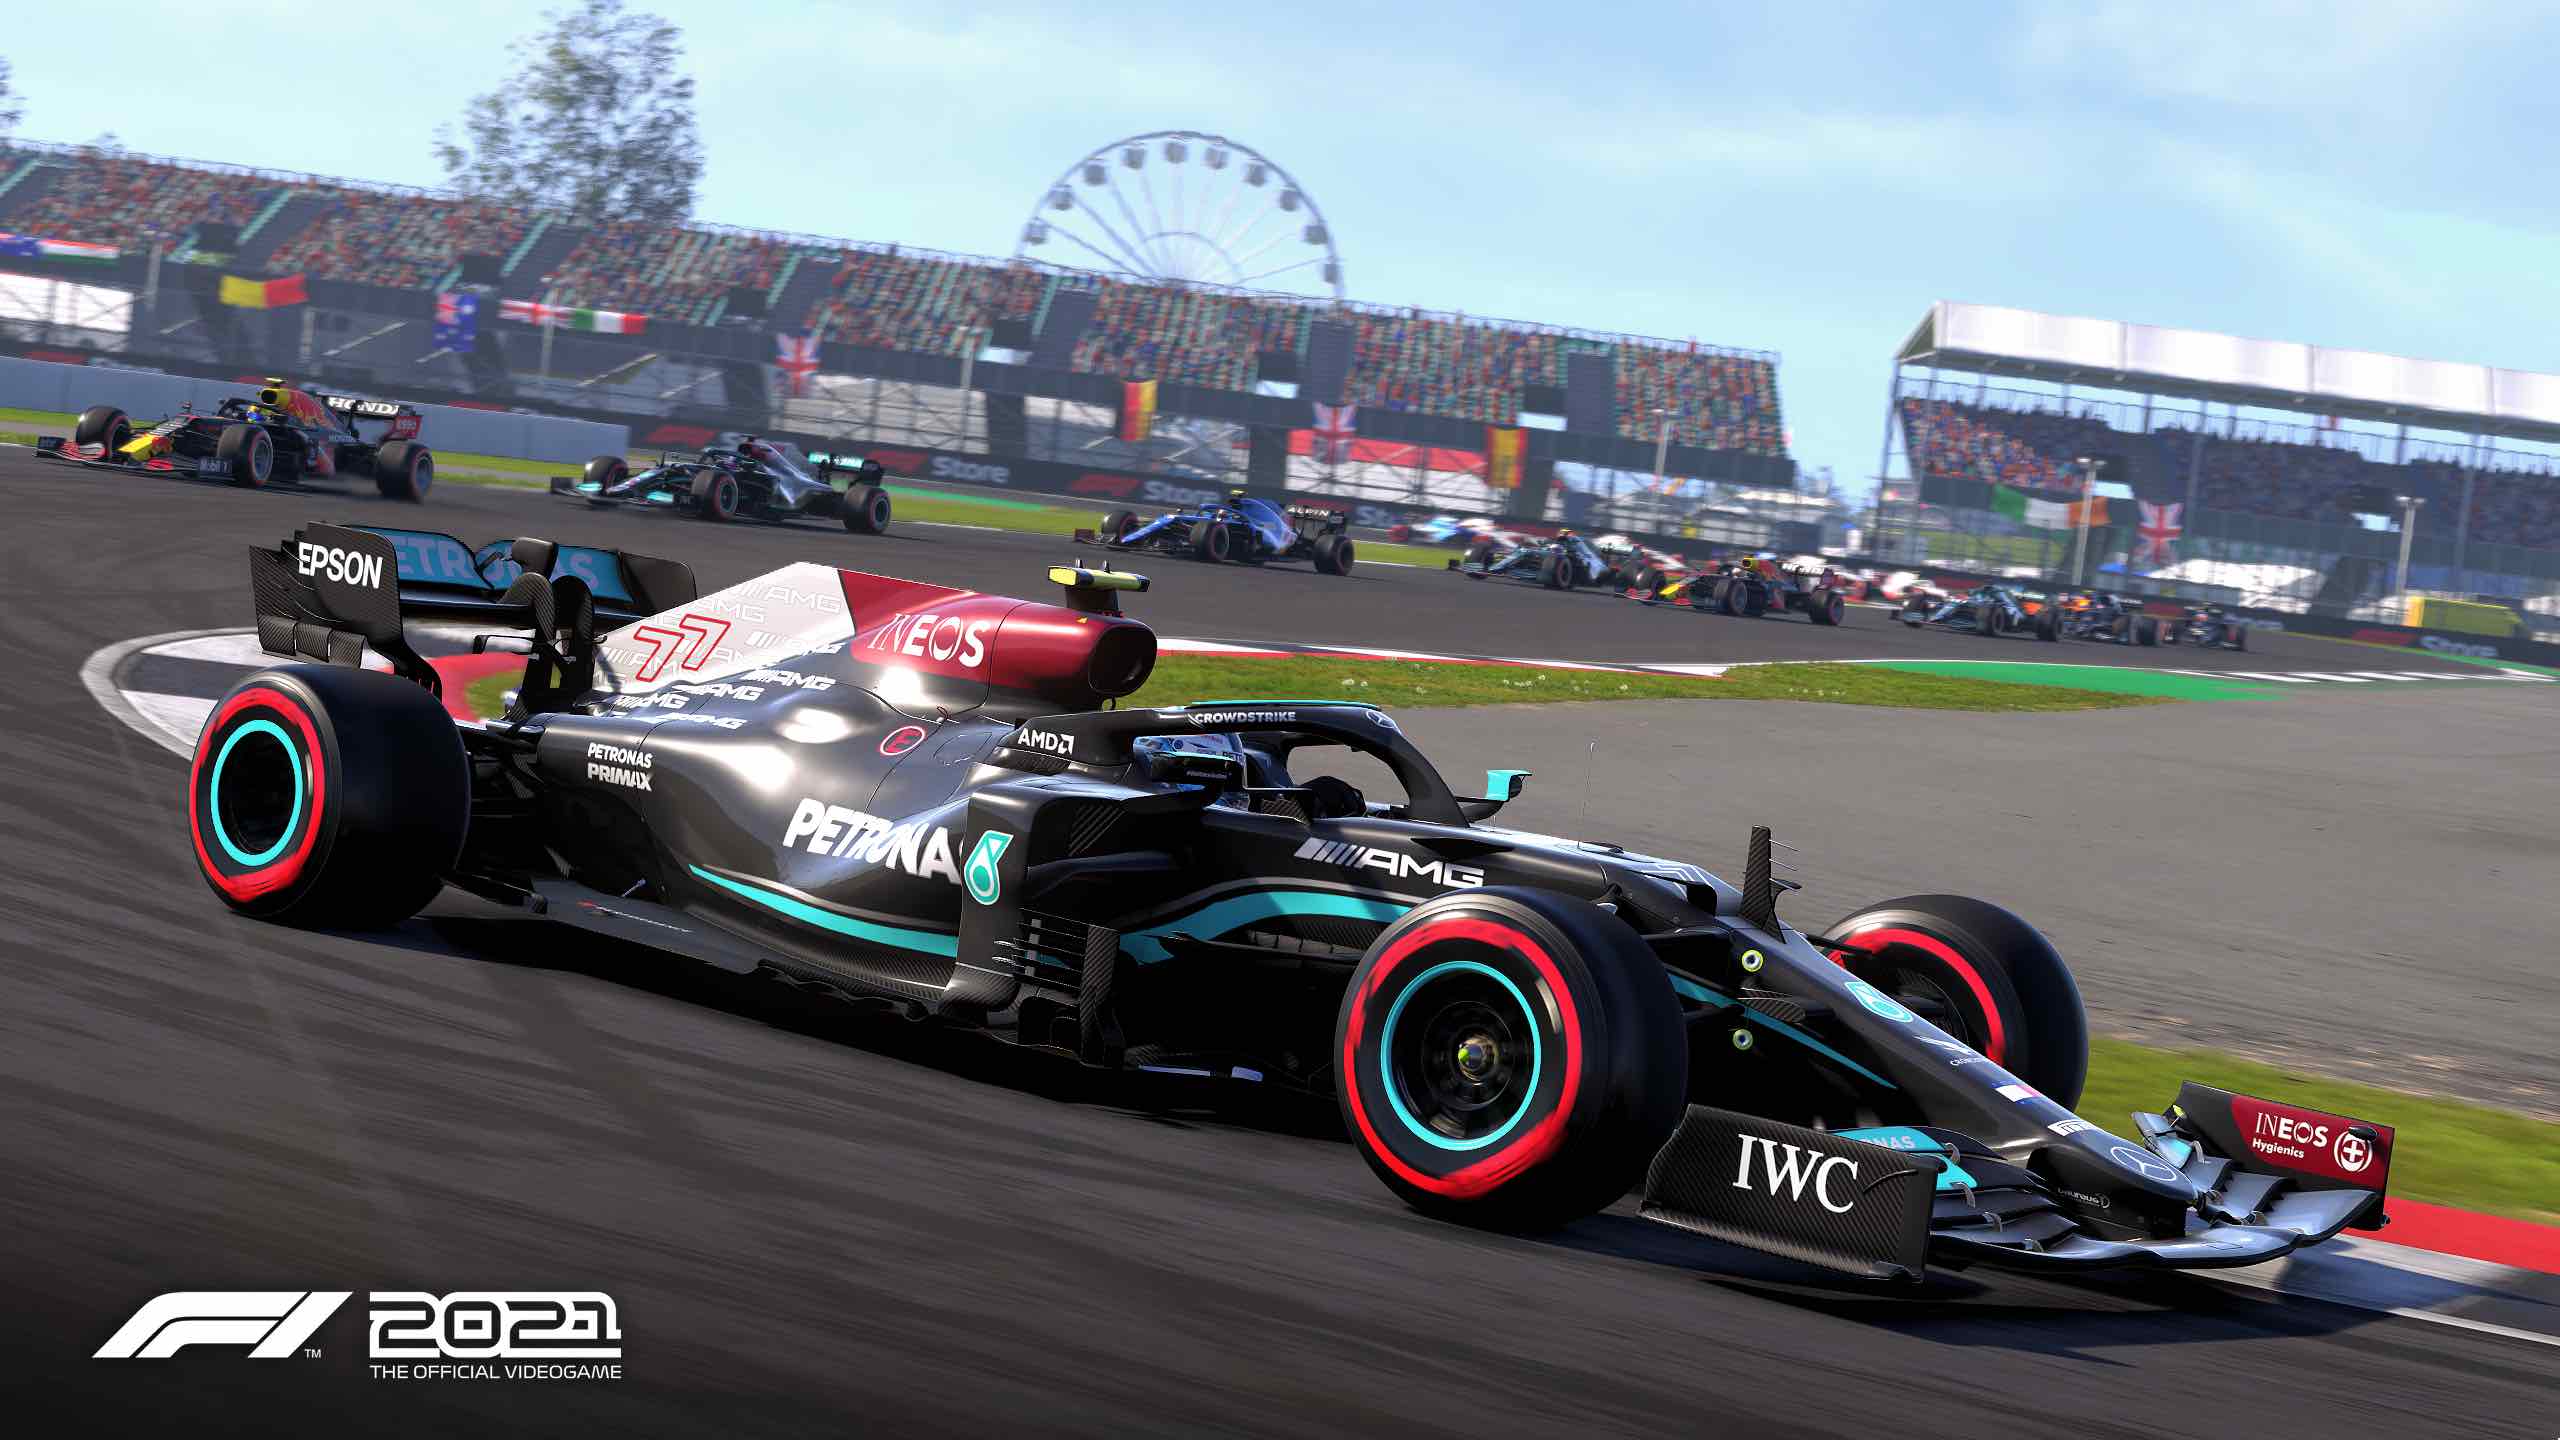 New circuits coming to F1 2021: here are the thumbnails